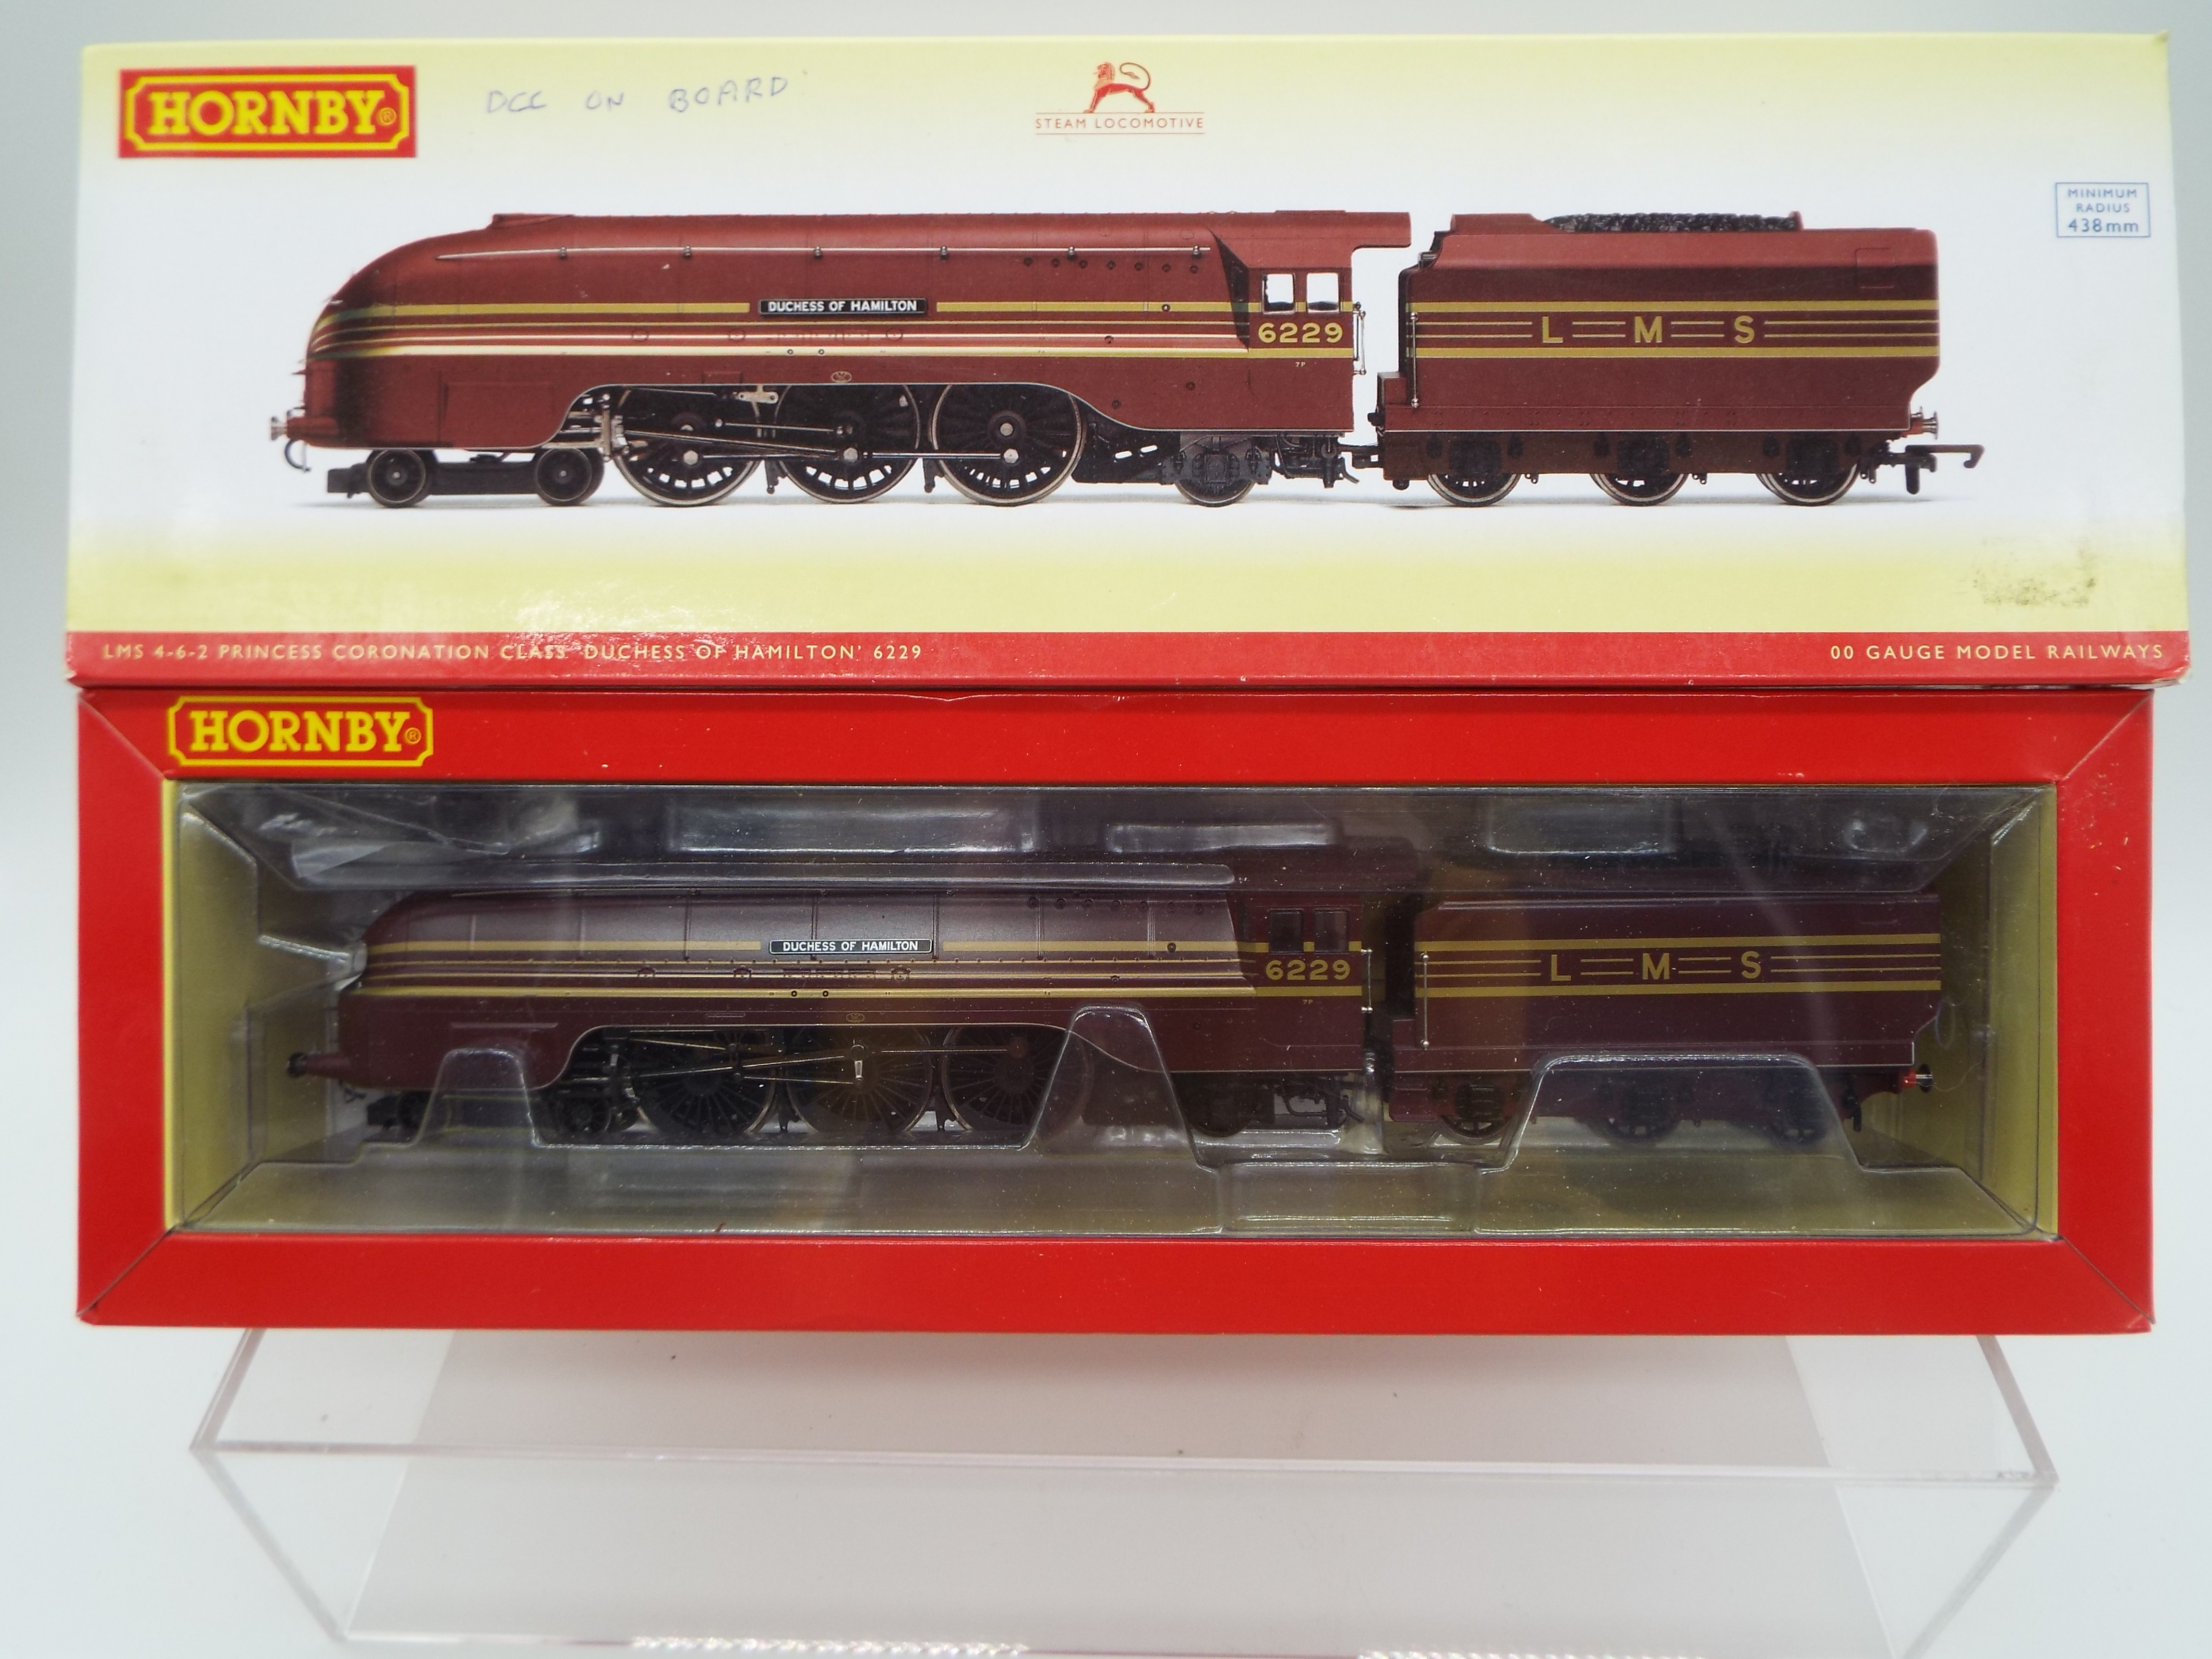 Hornby - an OO gauge model DCC Ready 4-6-2 locomotive and tender 'Duchess of Hamilton' running no